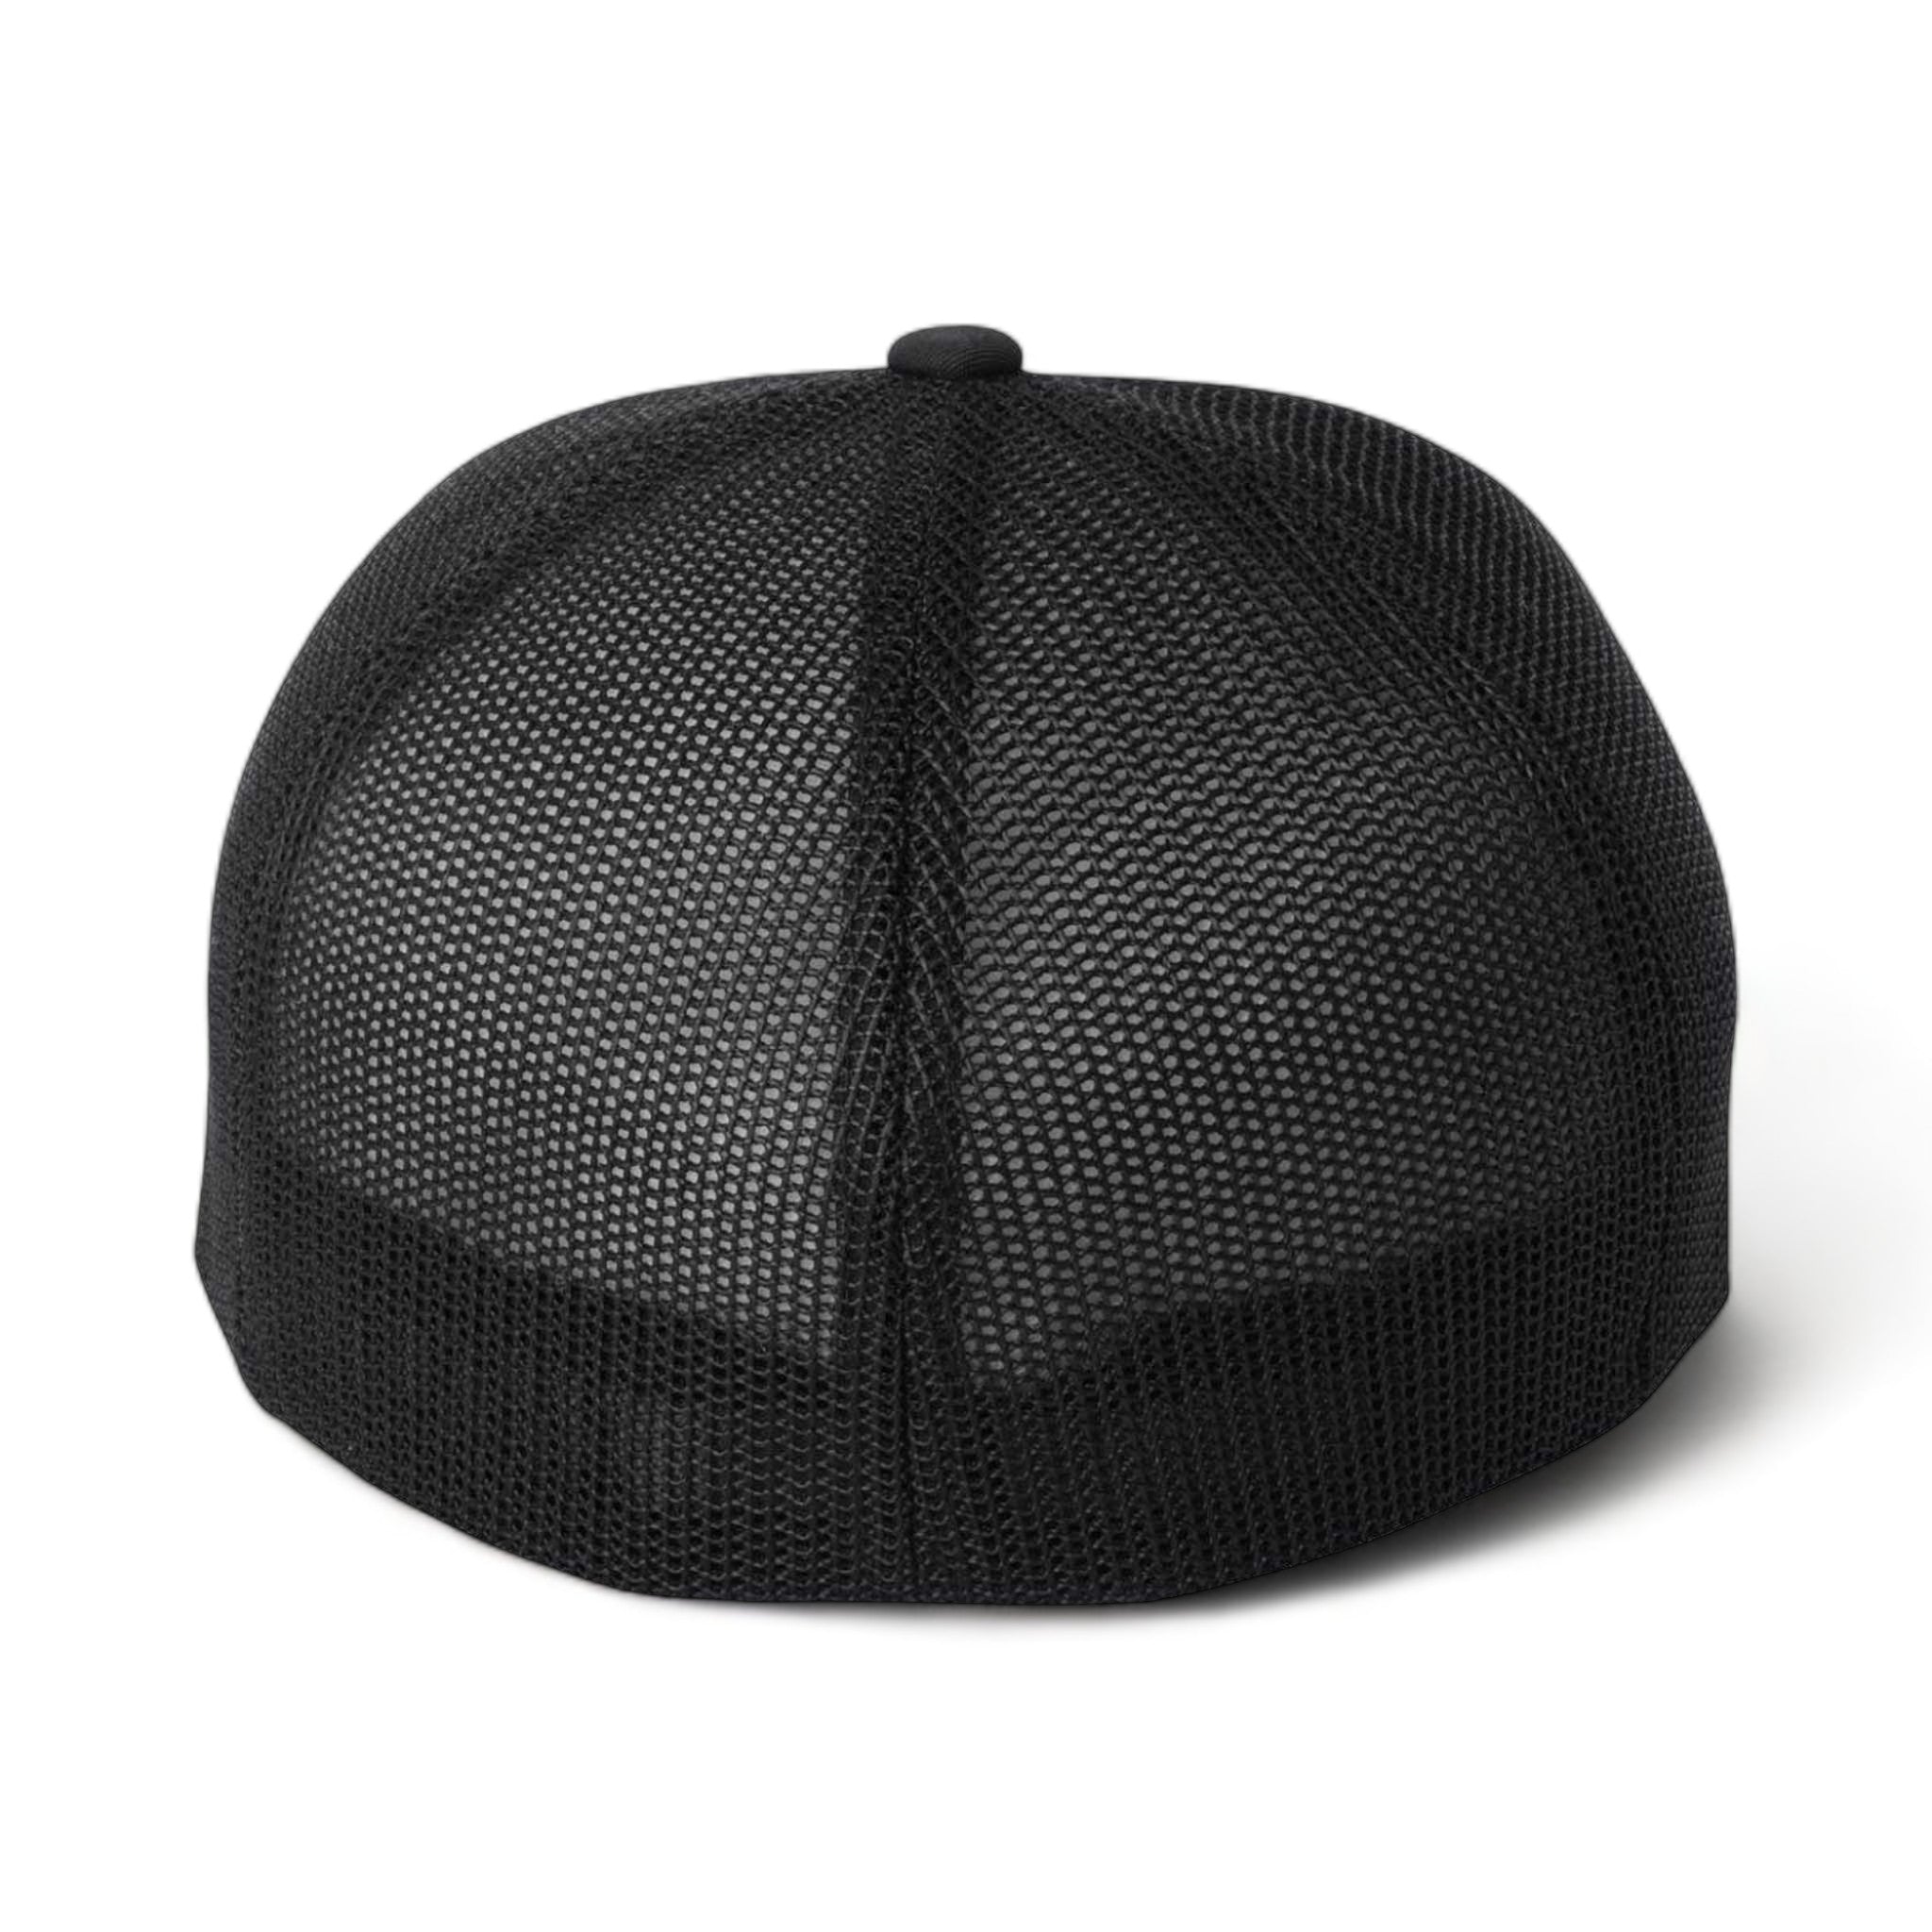 Back view of Flexfit 6511 custom hat in black, white and black